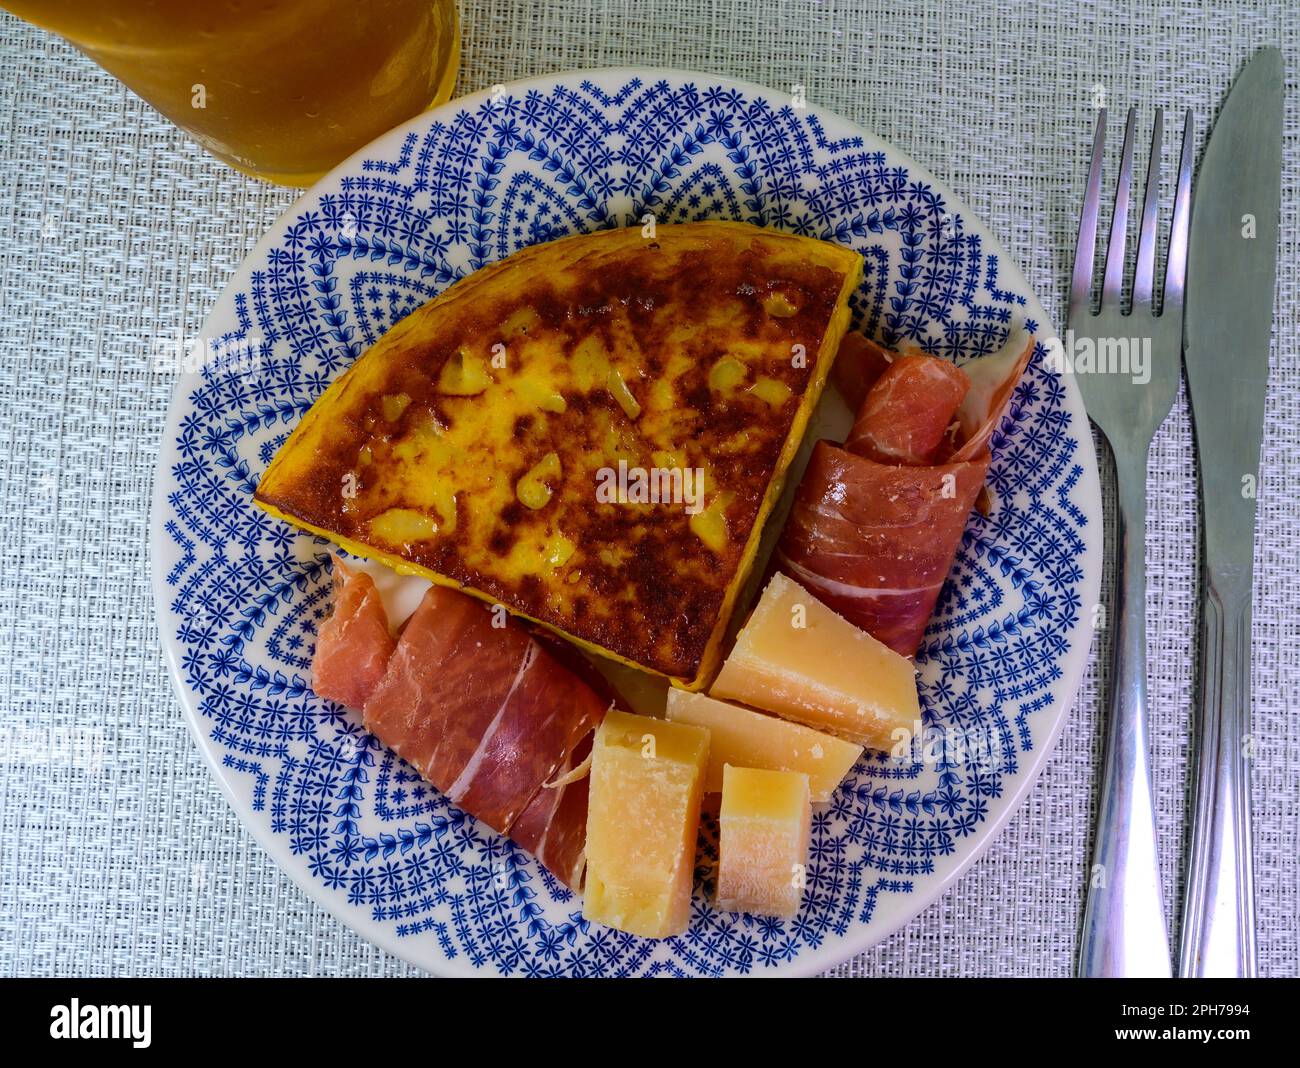 Spanish food, portion of potato omelette tortilla de patatas with onion served with cheese and jamon in cafe Stock Photo